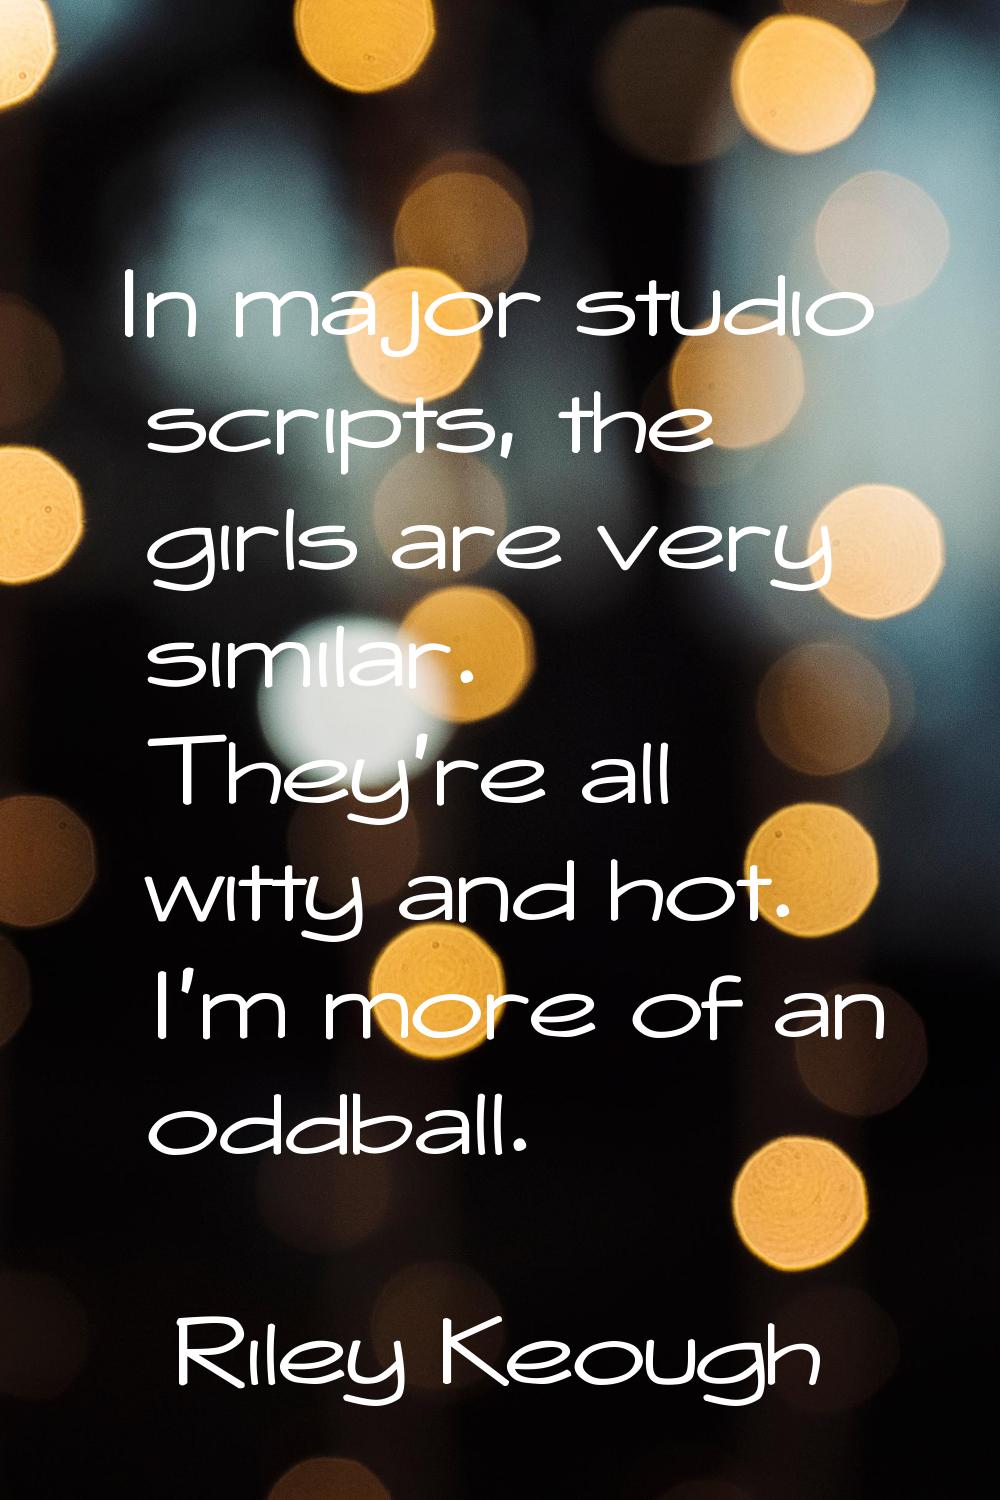 In major studio scripts, the girls are very similar. They're all witty and hot. I'm more of an oddb